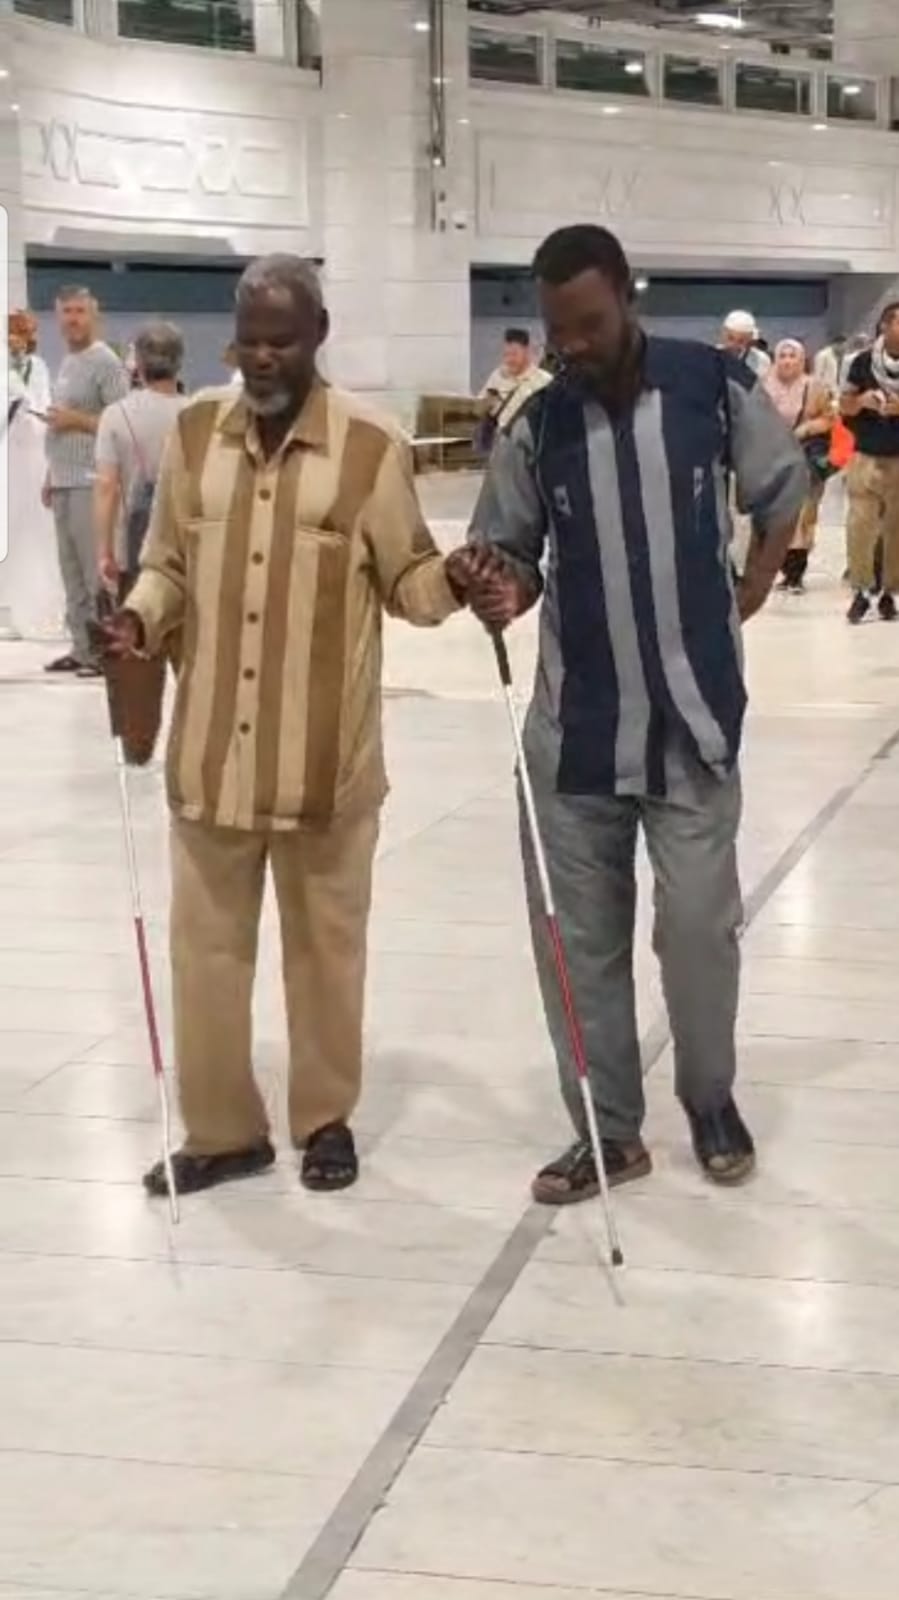 Sudanese visually impaired friends fulfill their dream of performing Hajj in Saudi Arabia